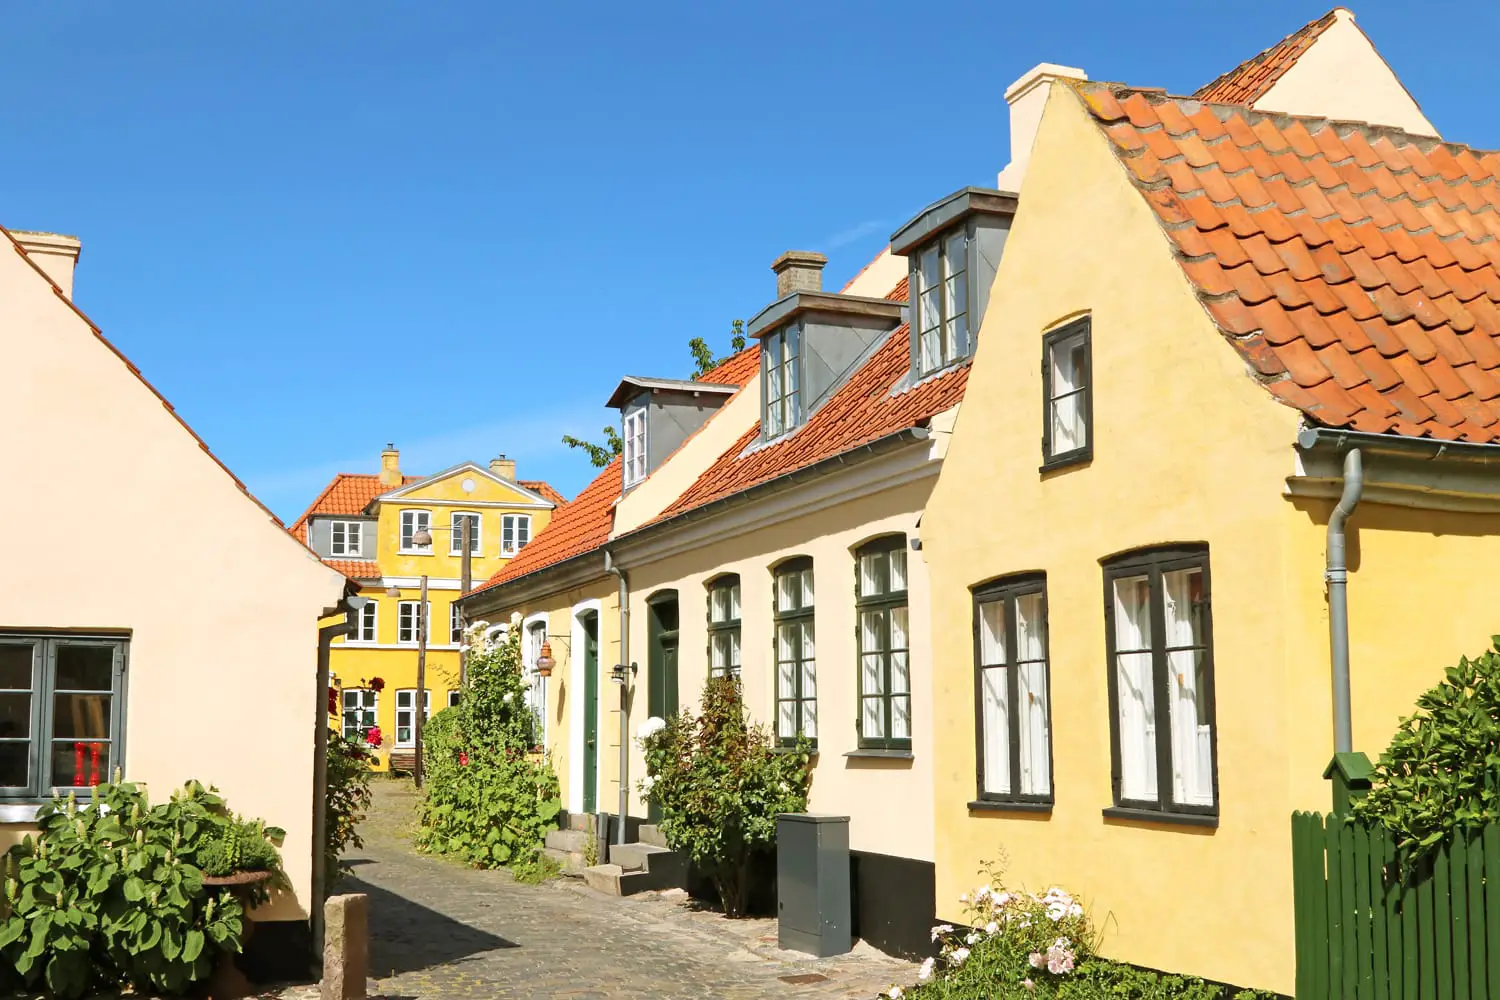 Cobbled street with yellow-painted houses in Dragor, Denmark